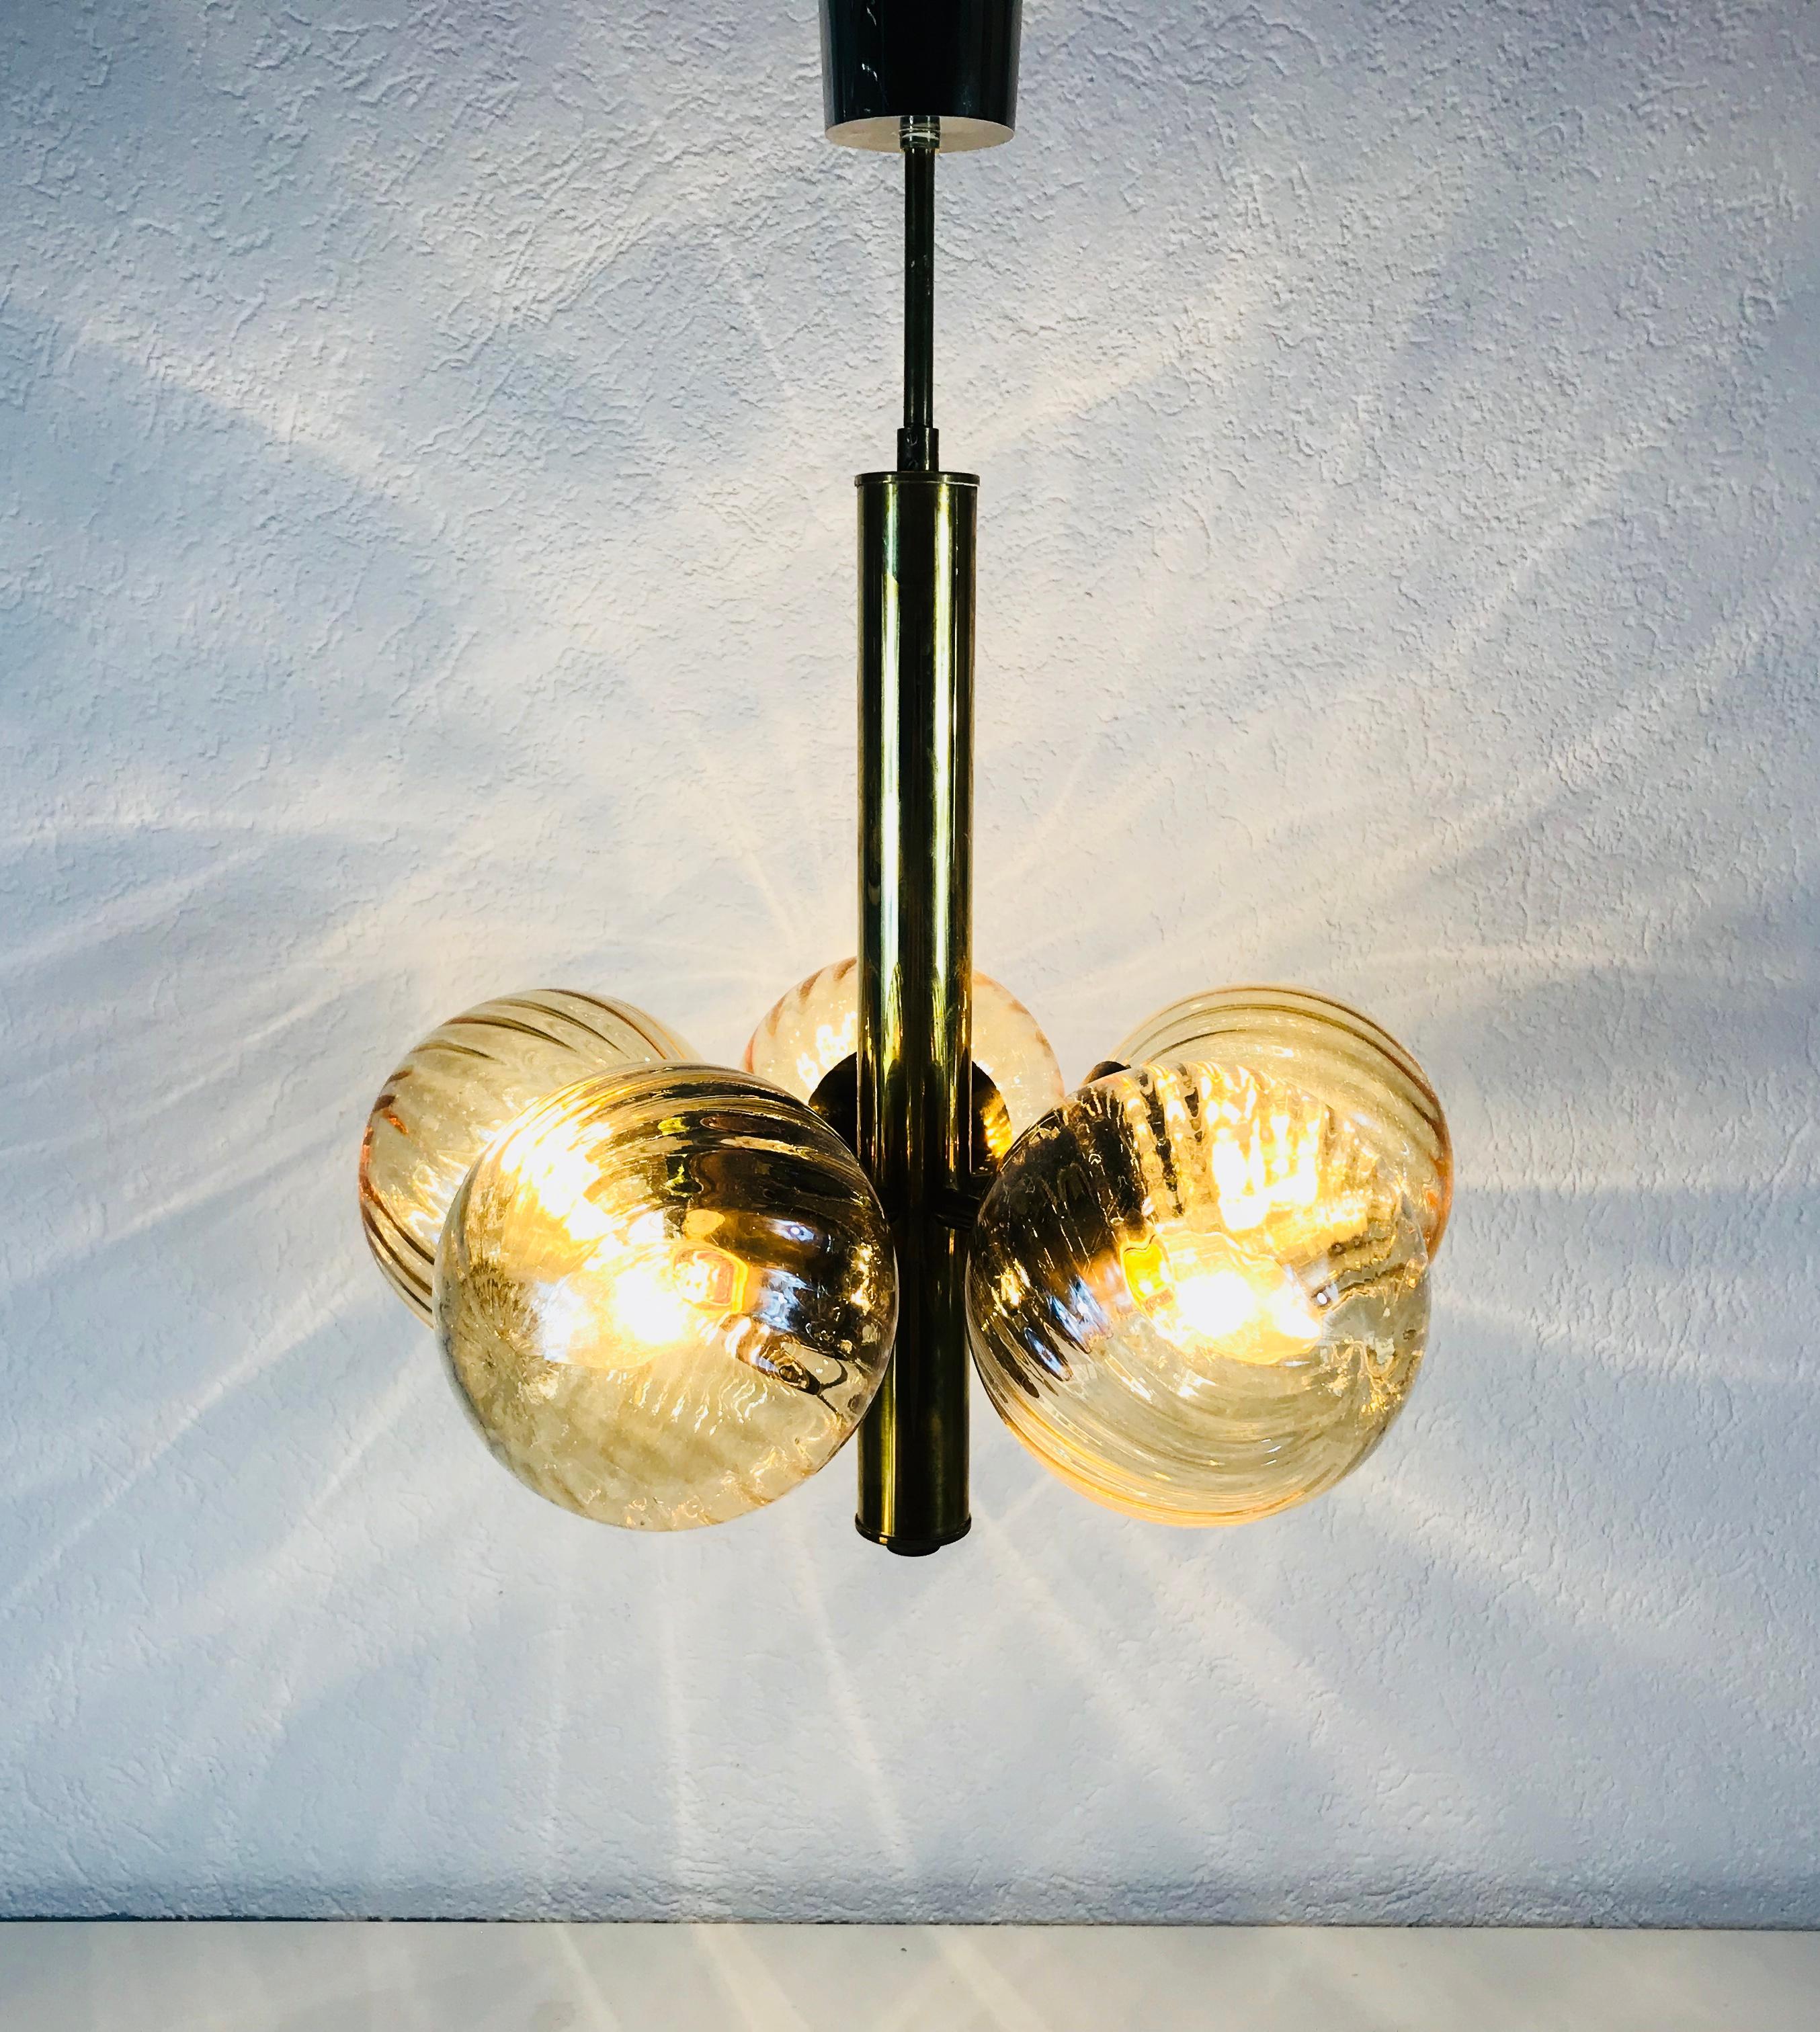 A midcentury chandelier made in Germany in the 1960s. It is fascinating with its Space Age design and five amber glass balls. The body of the light is made of full golden colored metal, including the arms. 

The light requires five E14 light bulbs.